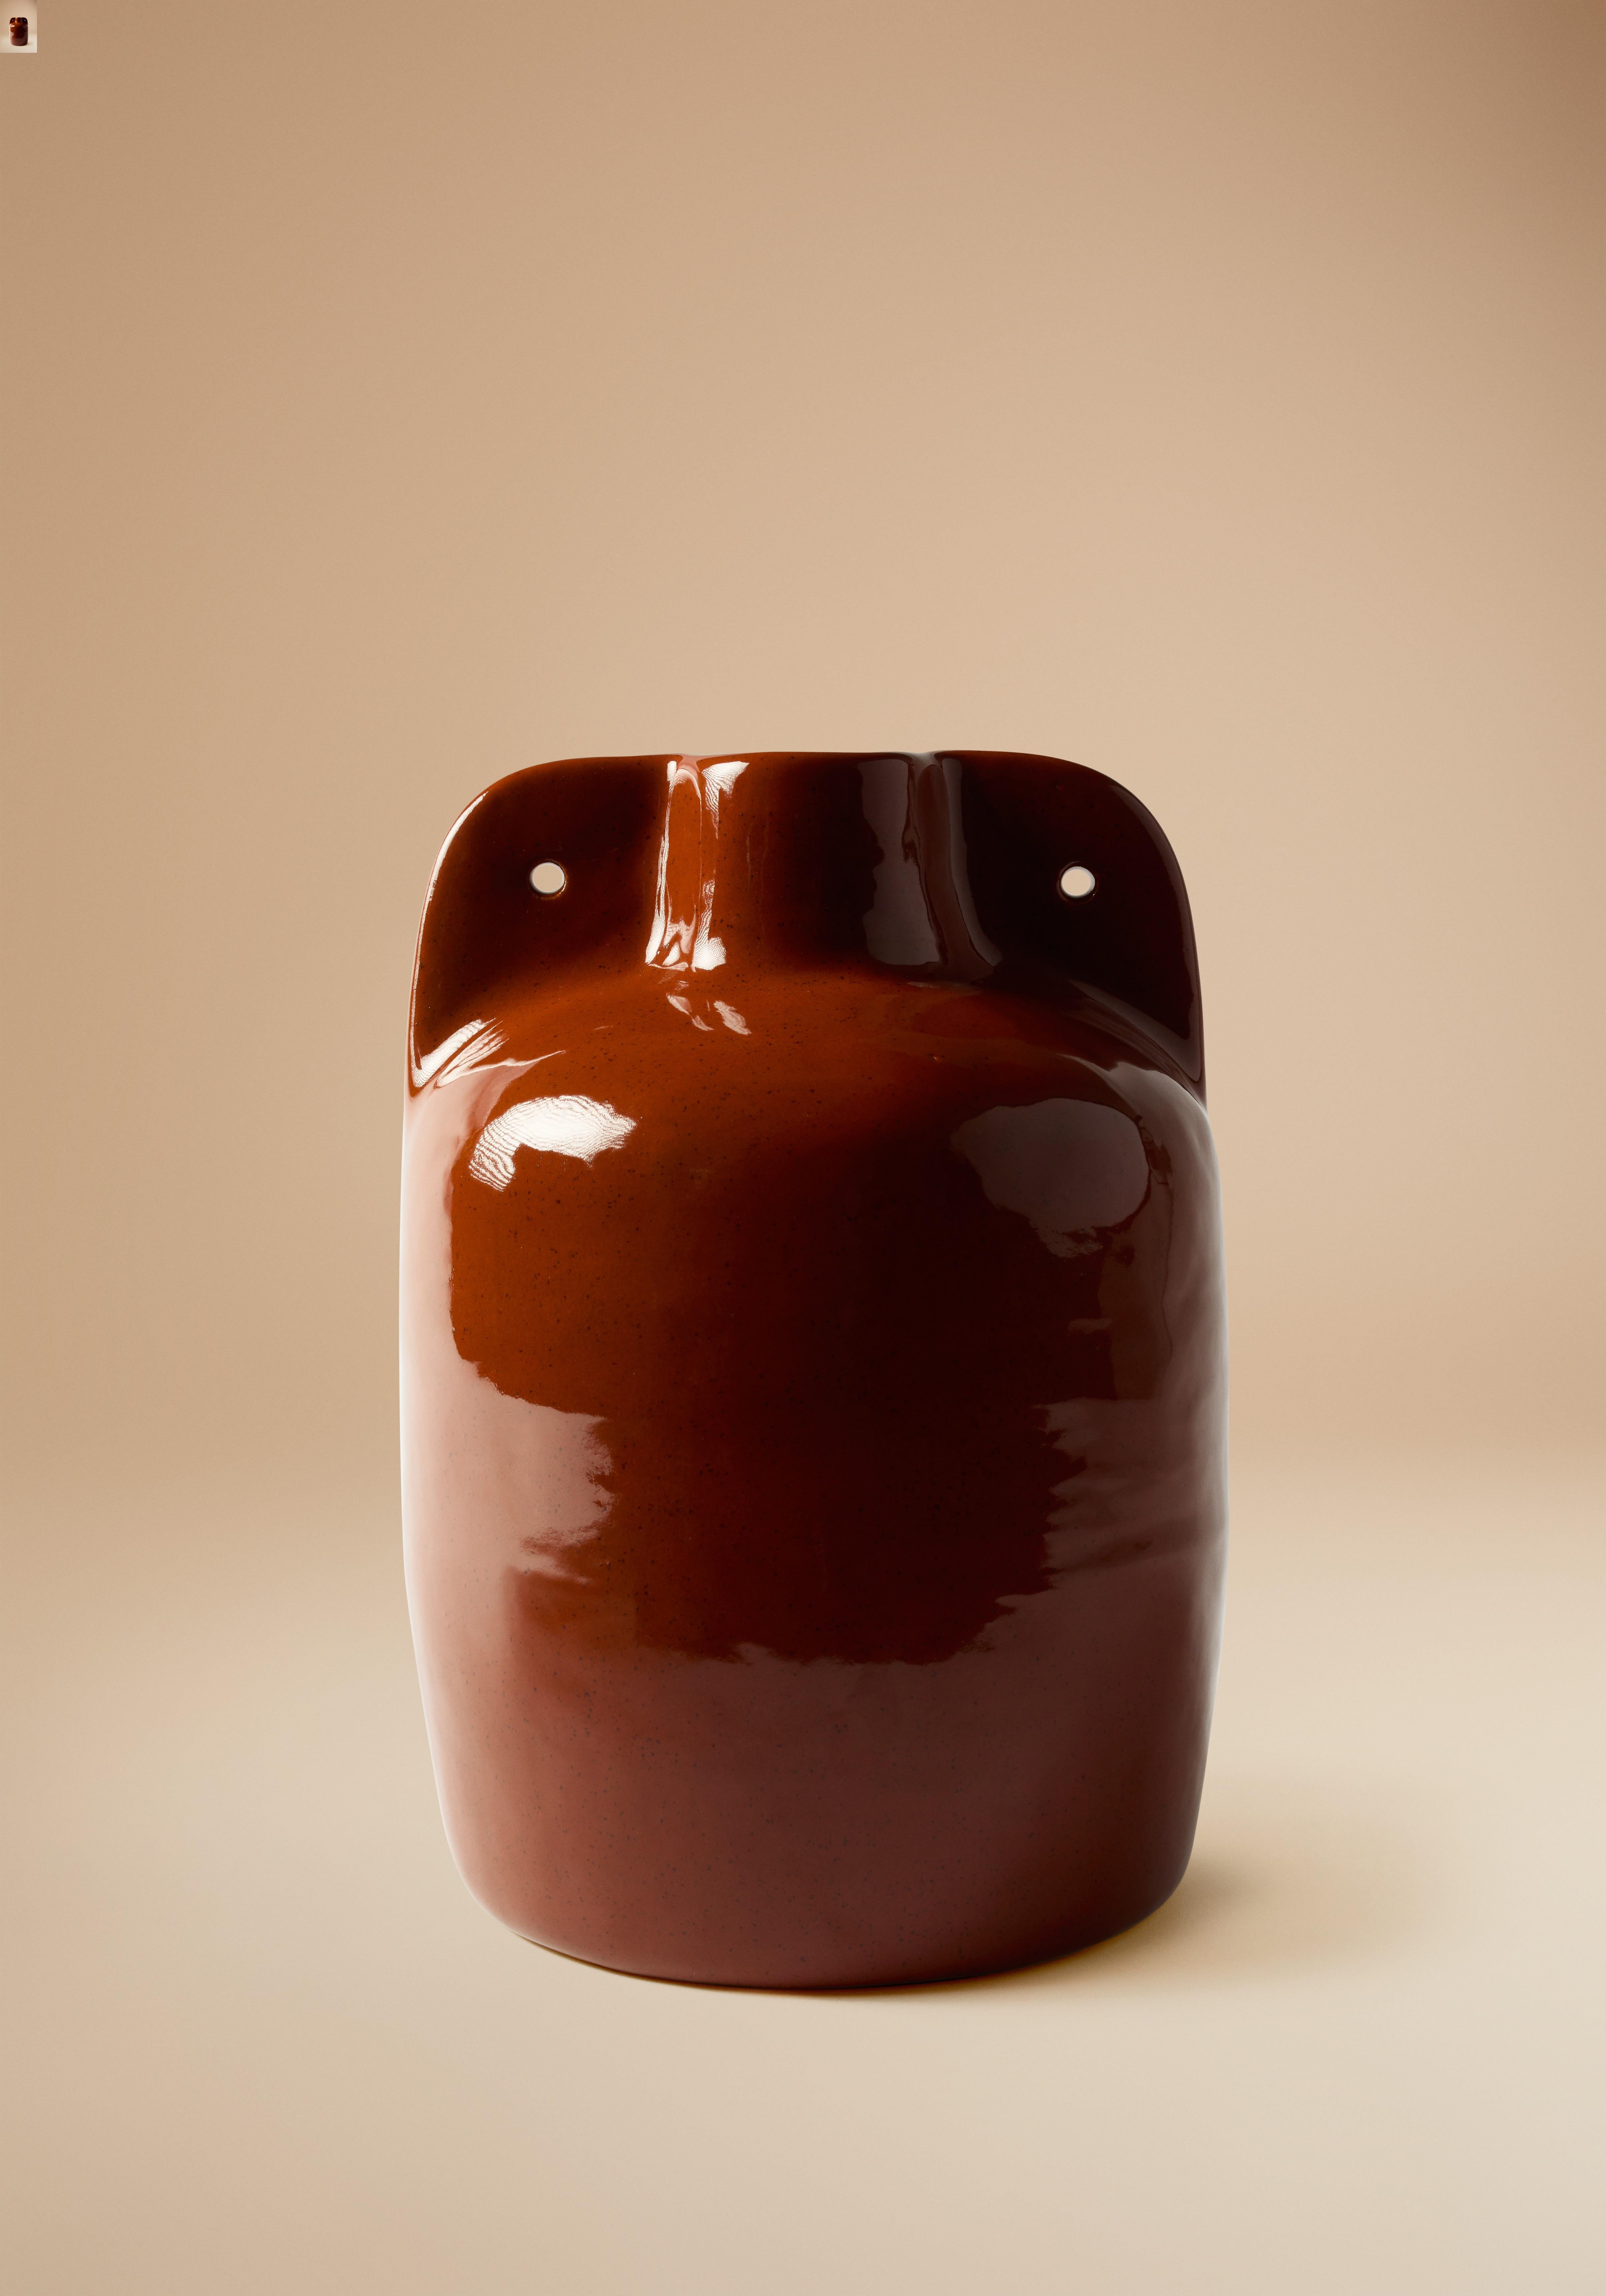 South African Vessel 07 in Smooth Stoneware Clay. Handmade by Jade Paton for Lemon For Sale